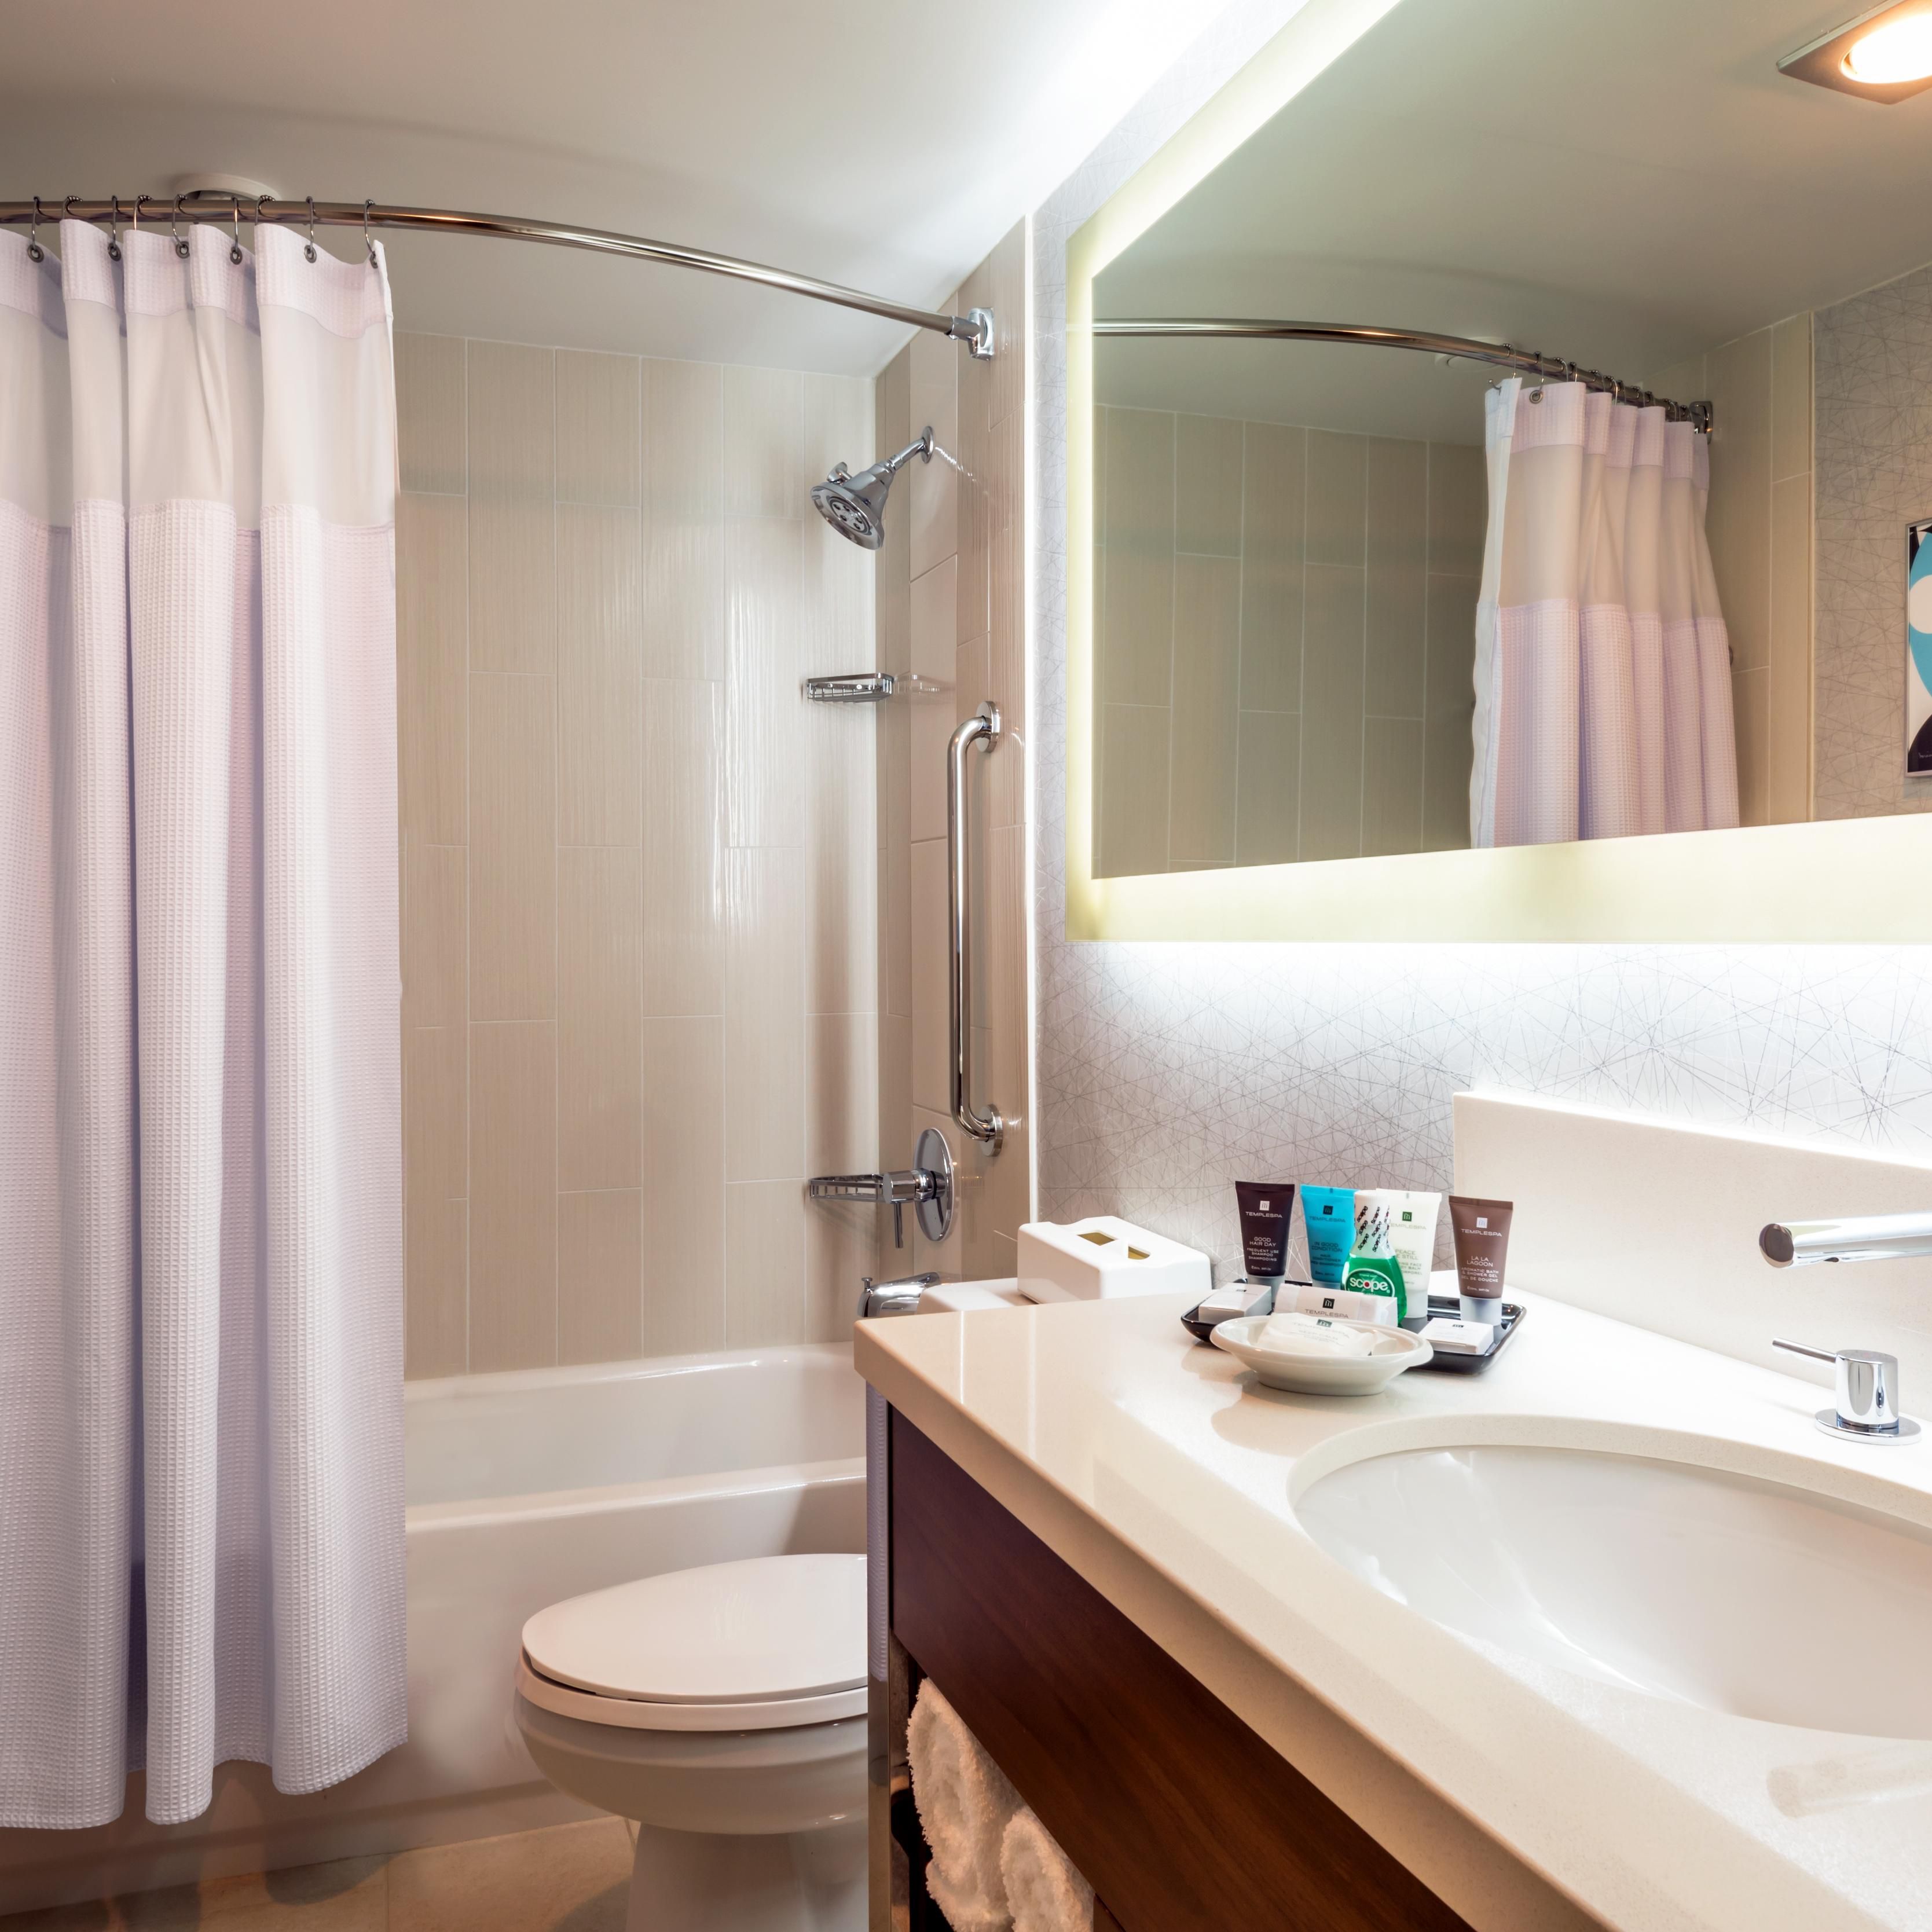 Newly renovated Guest Bathroom Temple Spa amenities